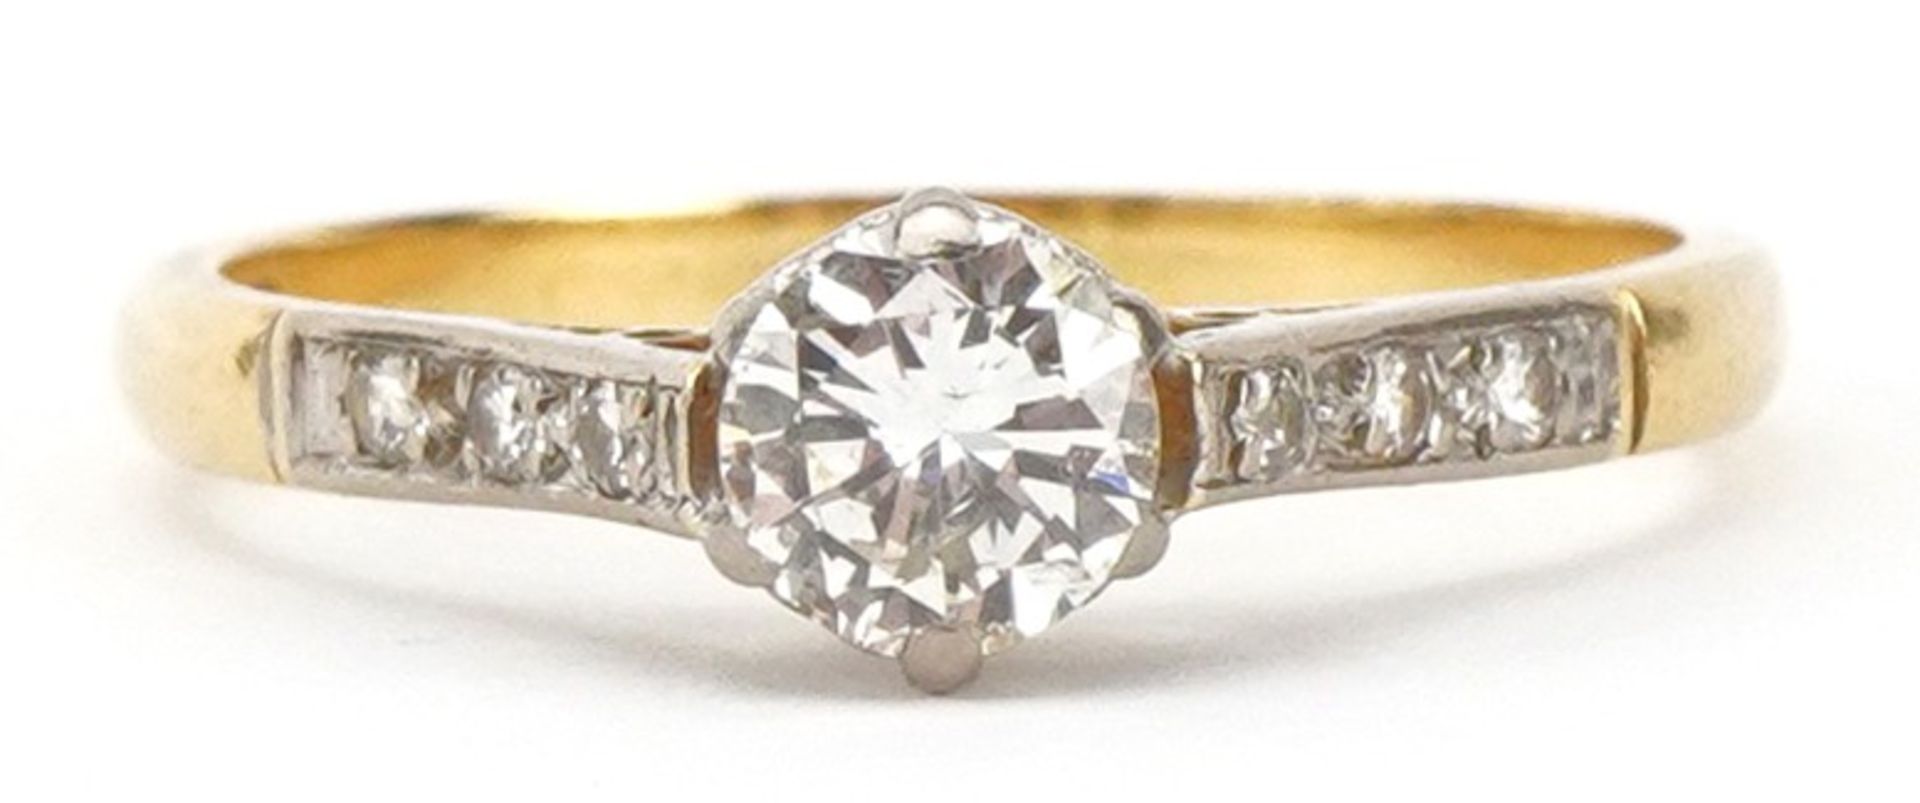 18ct gold and platinum diamond solitaire ring with diamond set shoulders, the central diamond